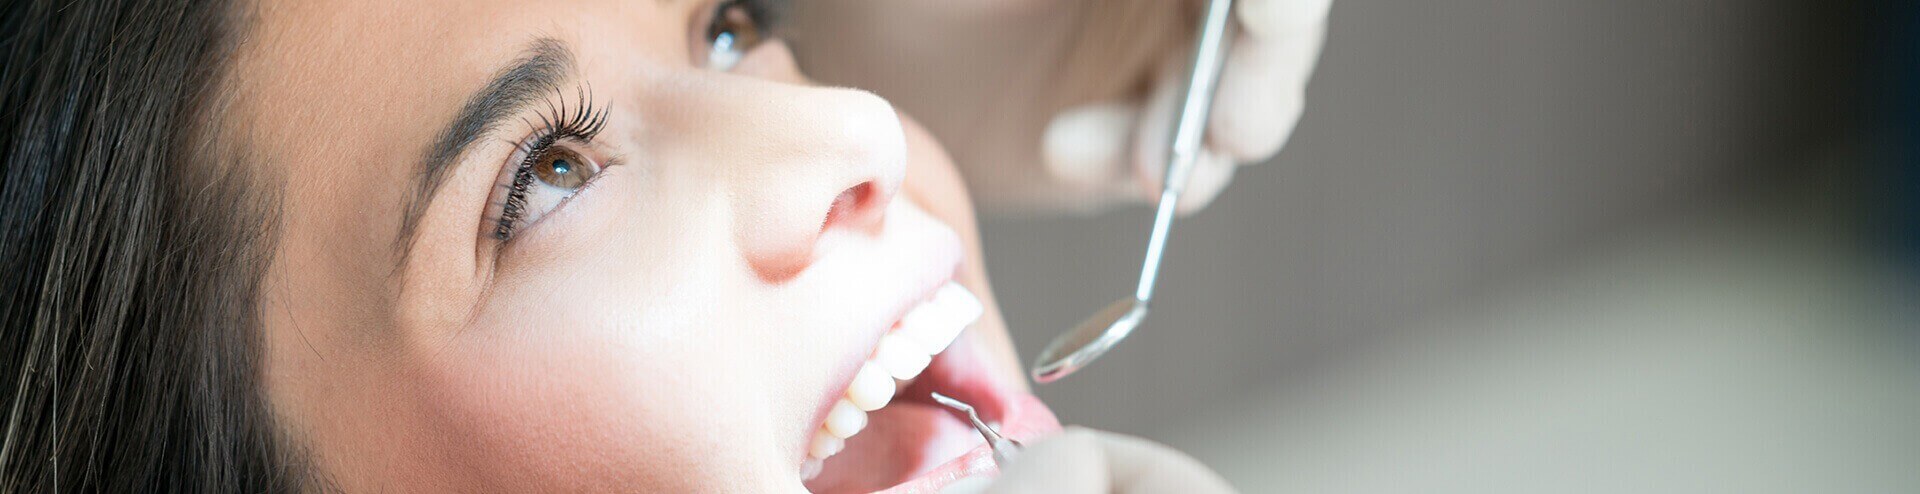 woman having her teeth examined by a dentist